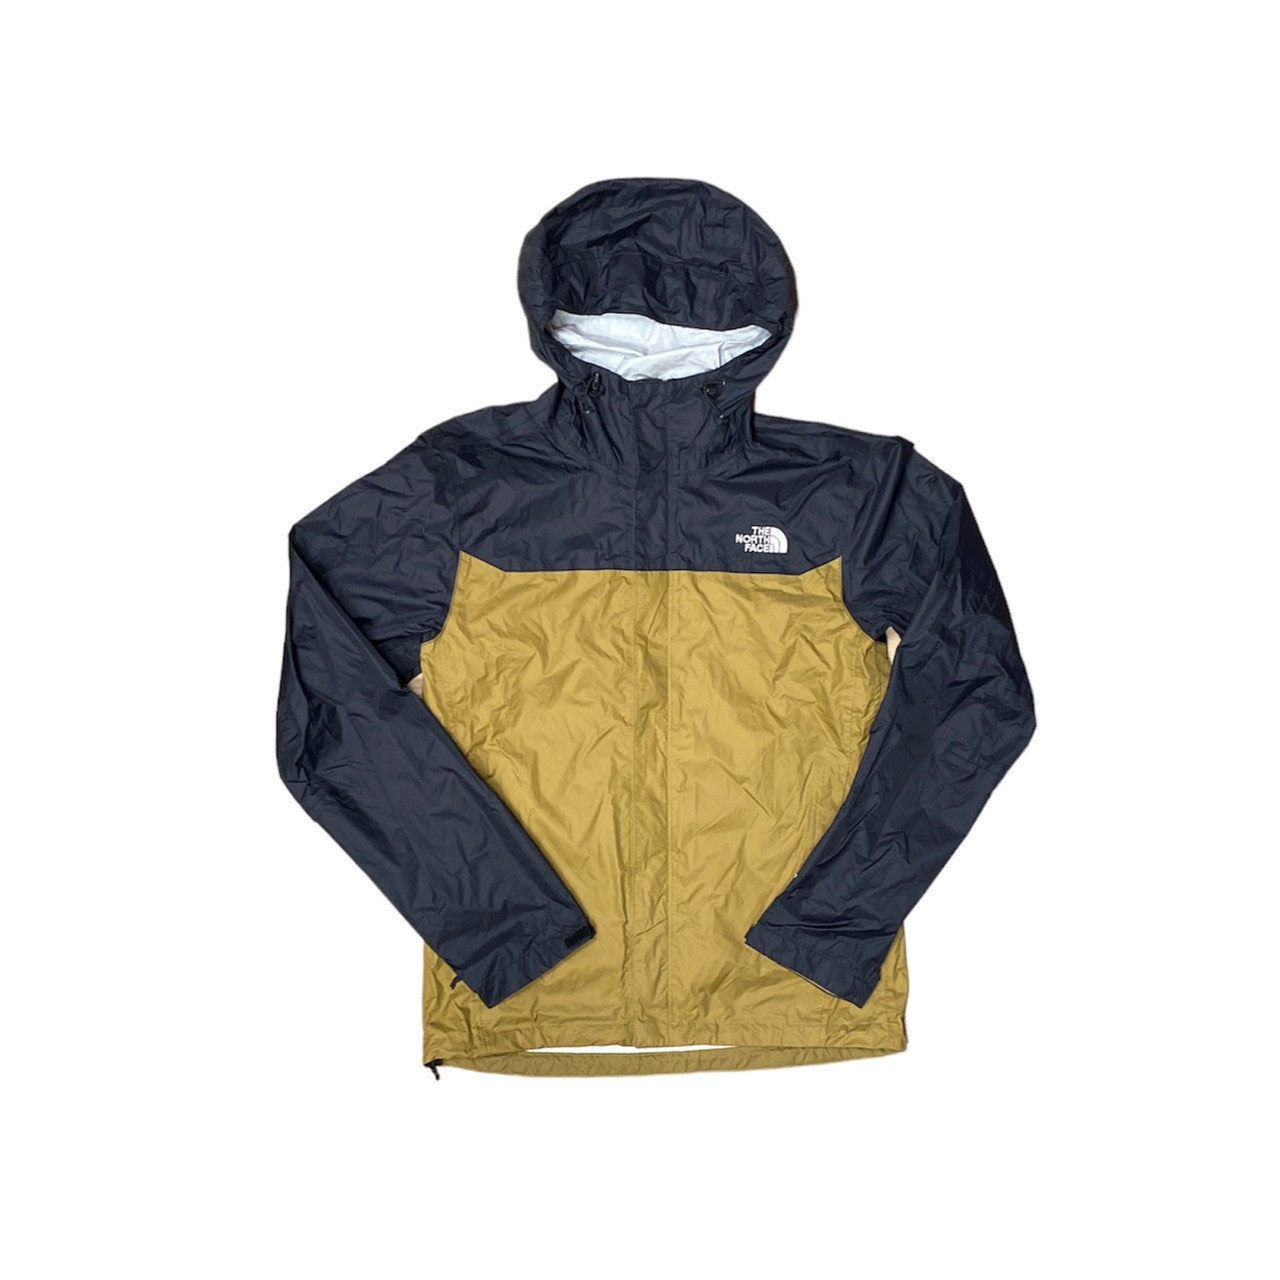 The North Face 1990 Mountain Jacket